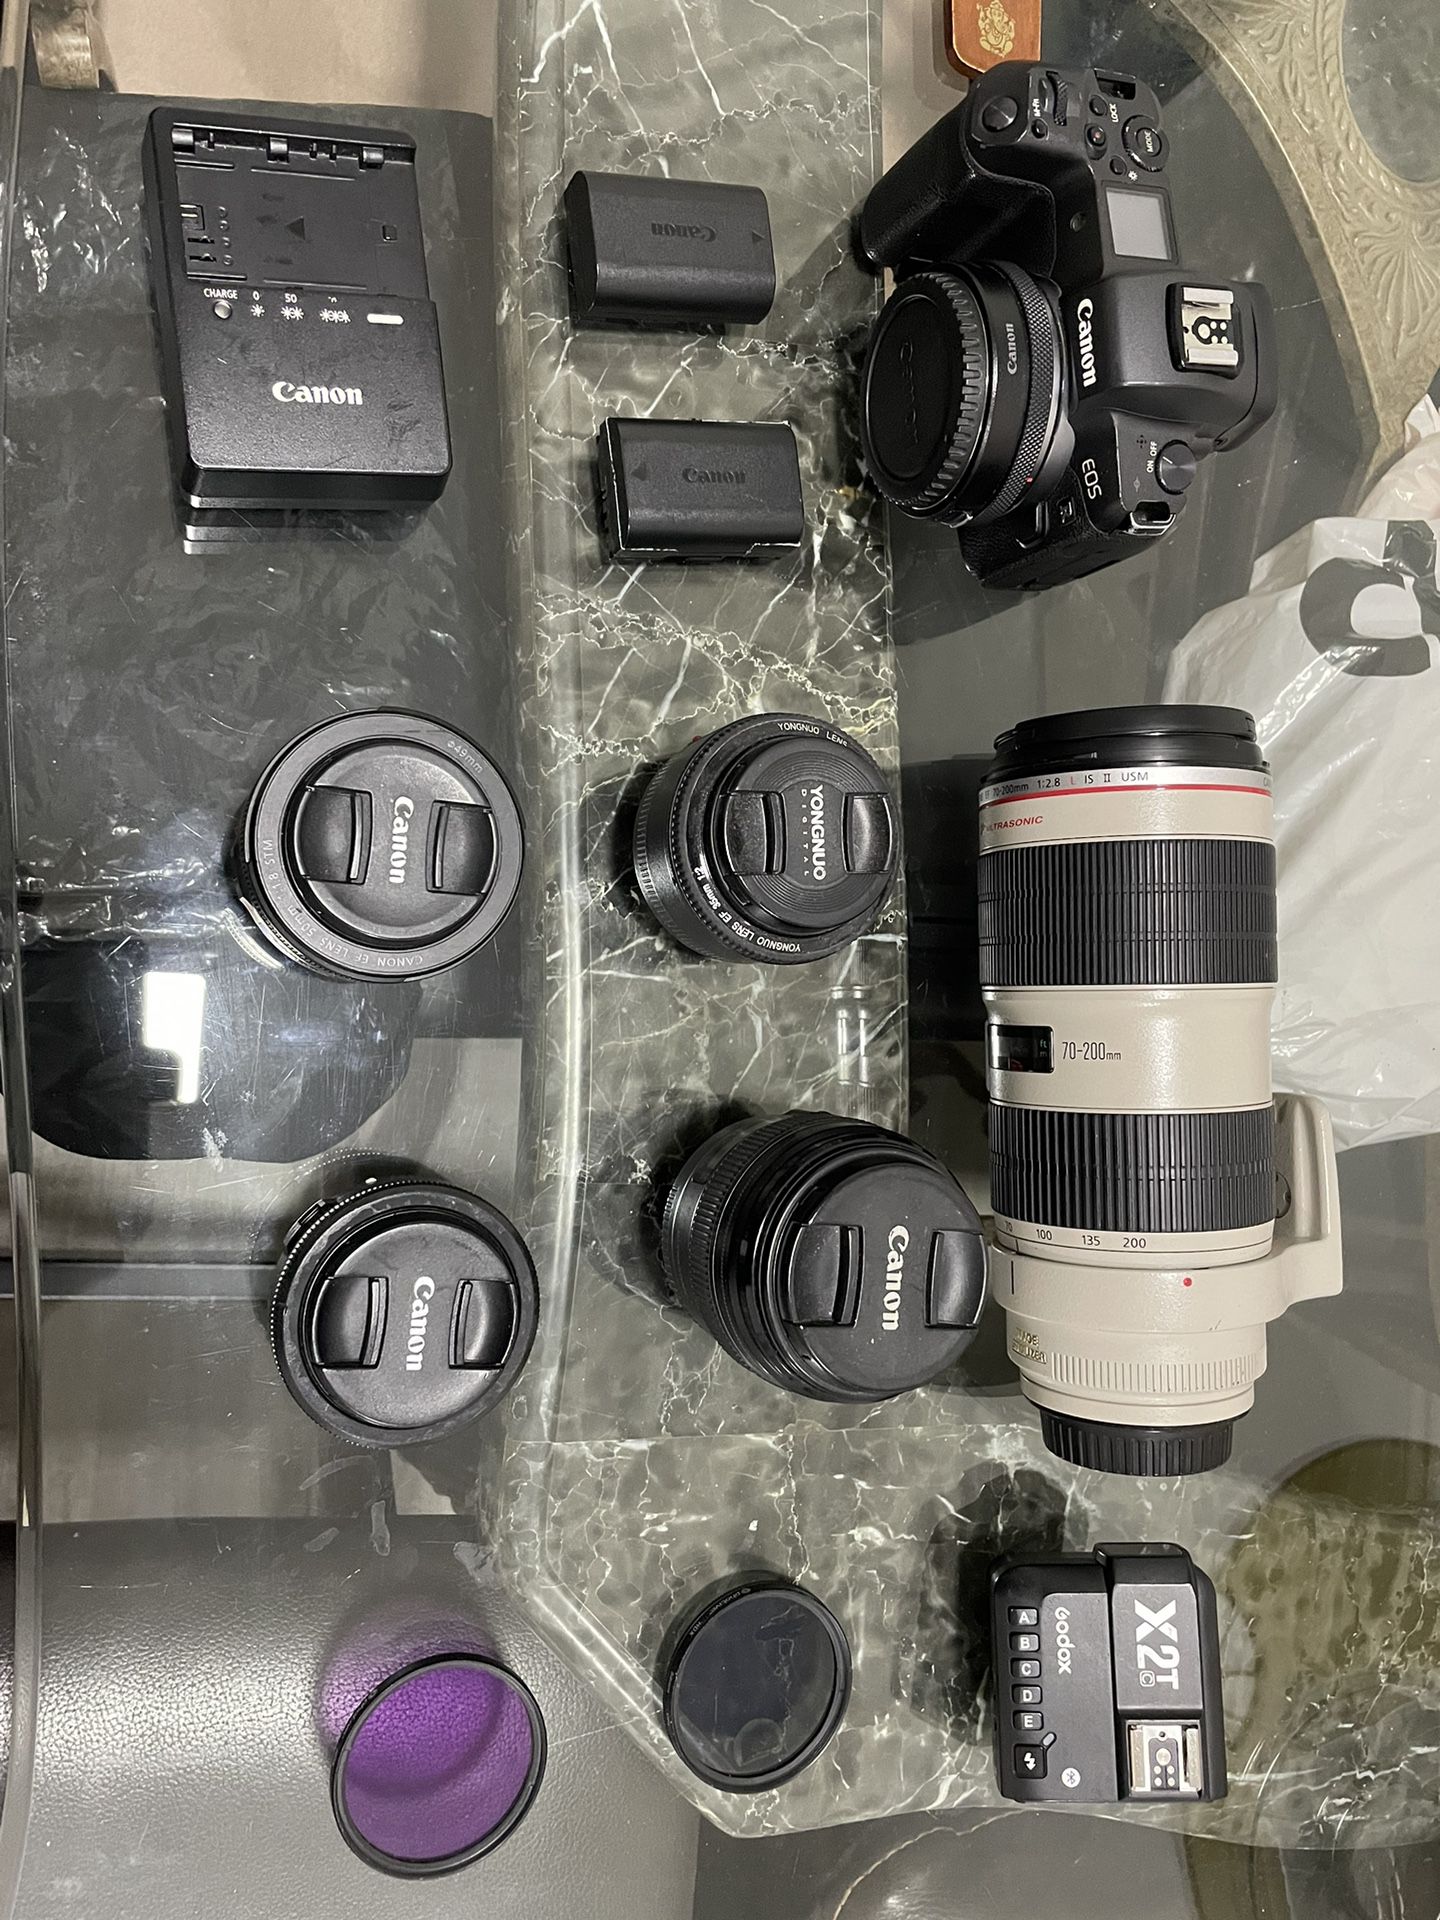 Eos R / Lens Set 24mm, 50mm, 85mm, 70-200mm Canon 35mm Youngnuo